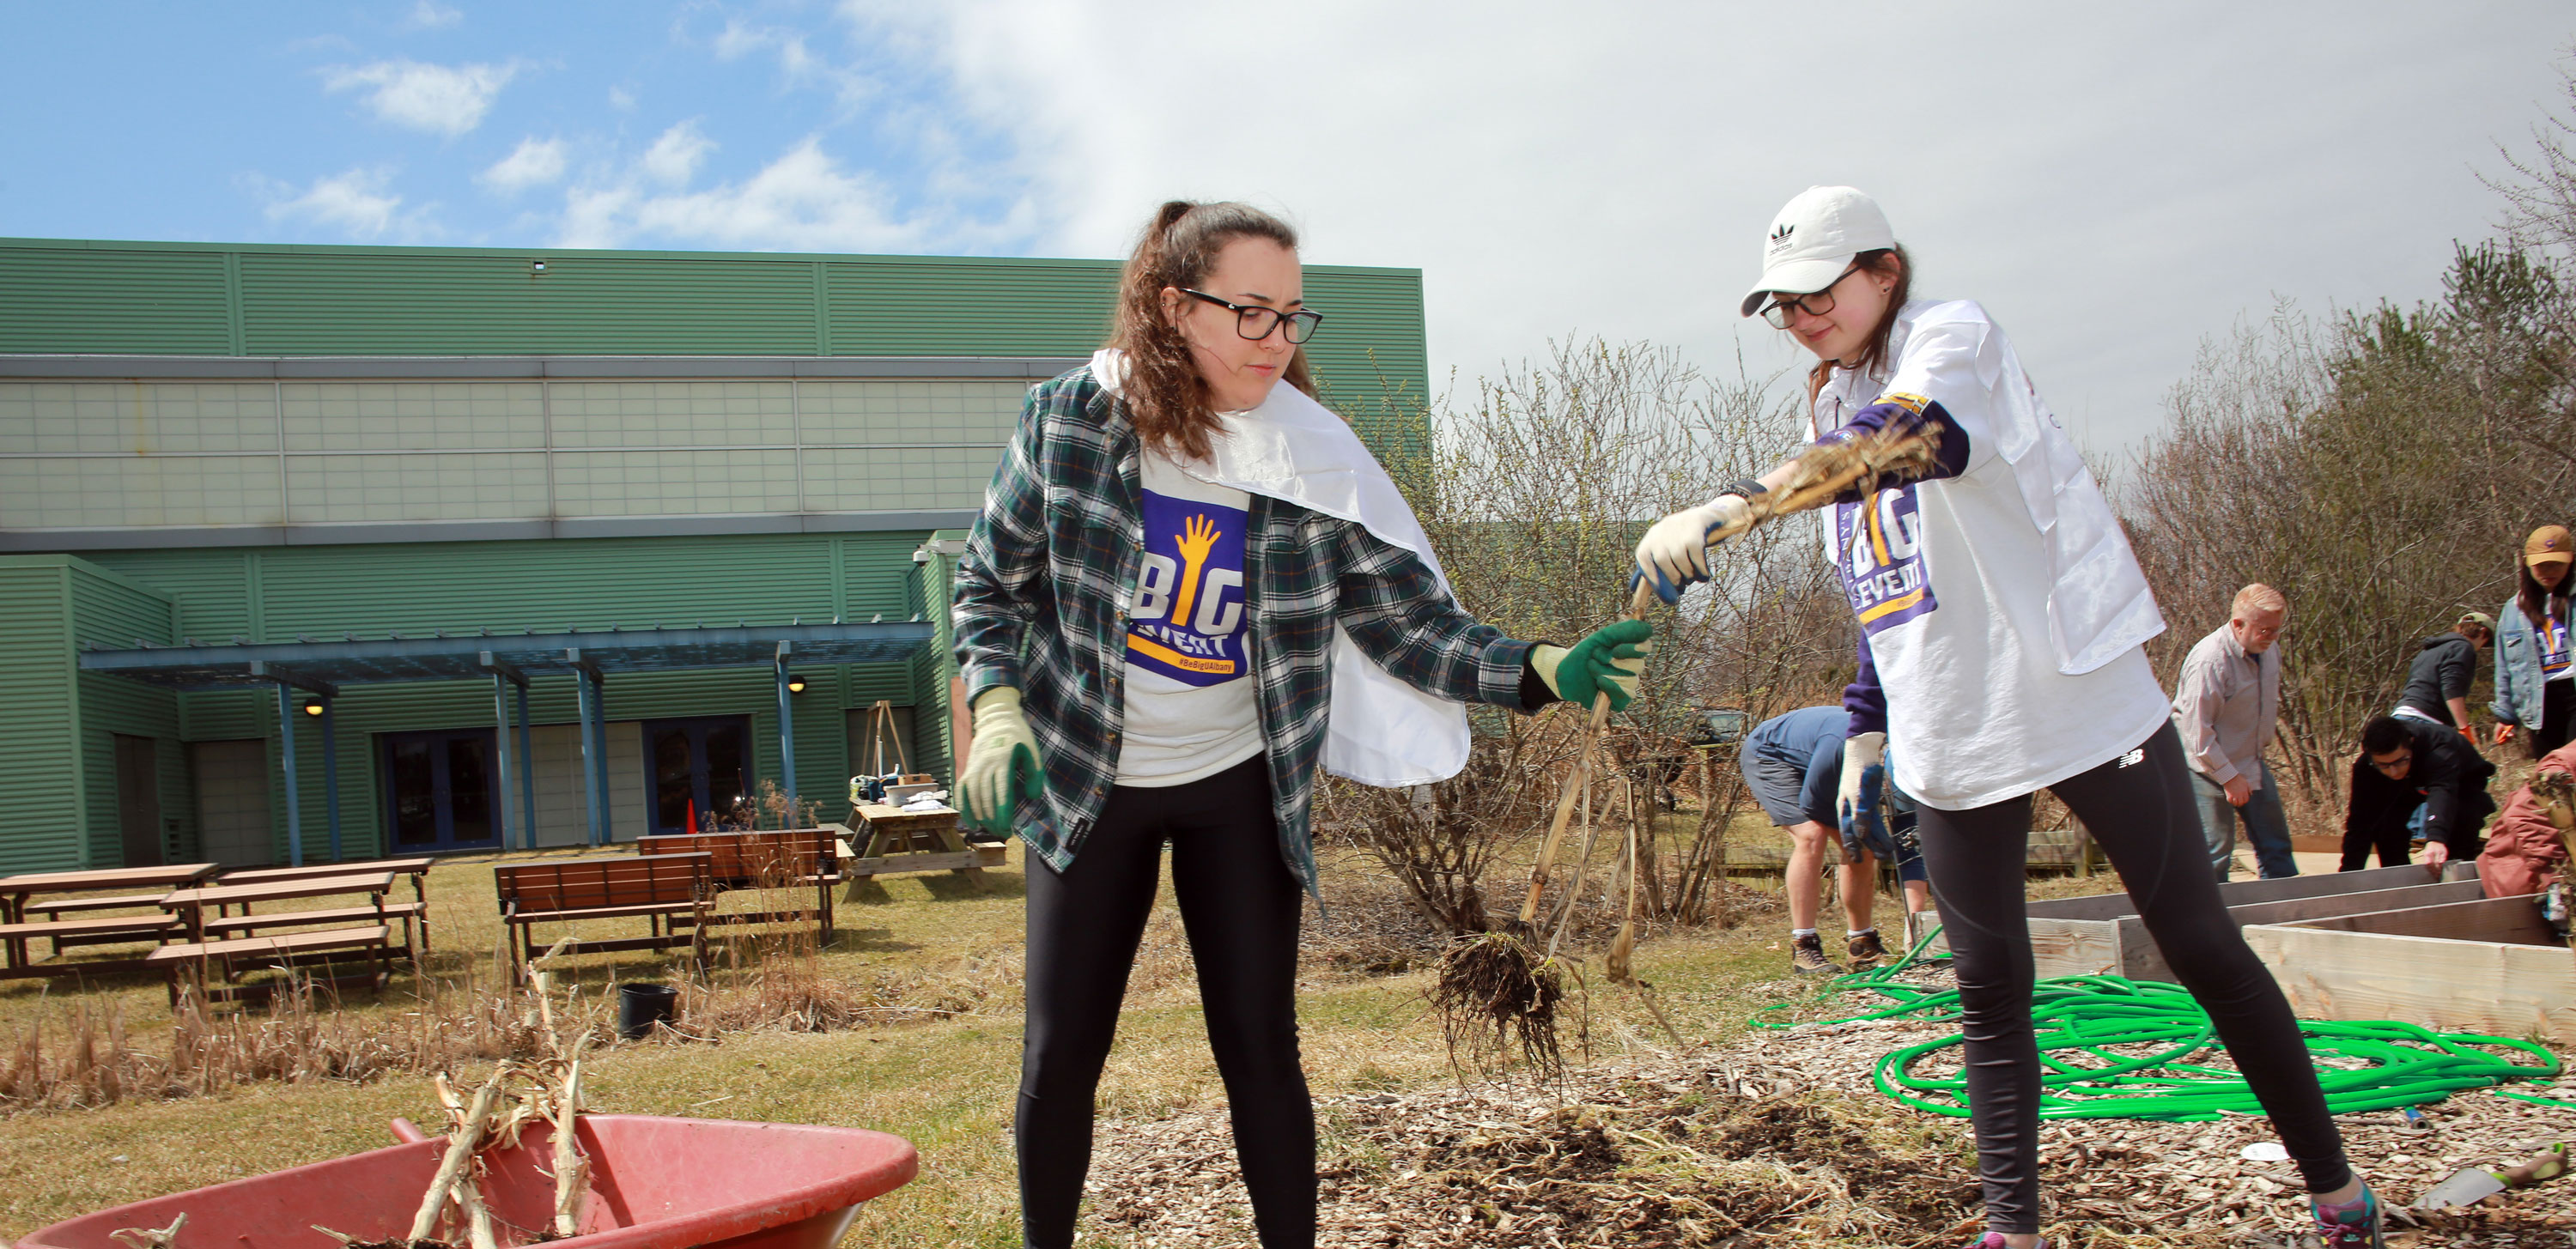 Two students wearing The Big Event t-shirts and gardening gloves work outside clearing a public garden of dead weeds.